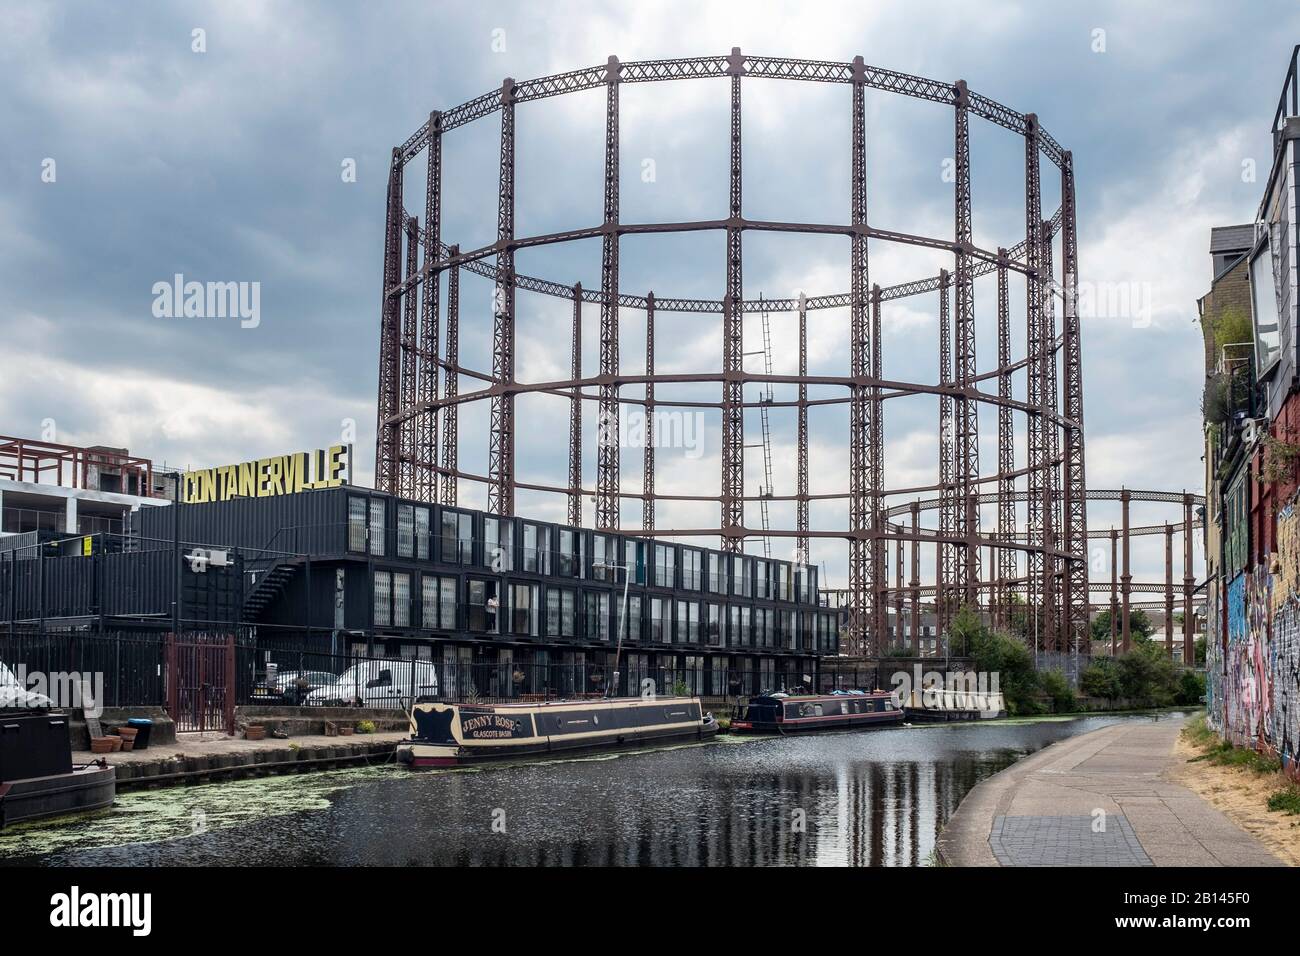 Victorian Gasometers at Regents Canal in Hackney, London Stock Photo